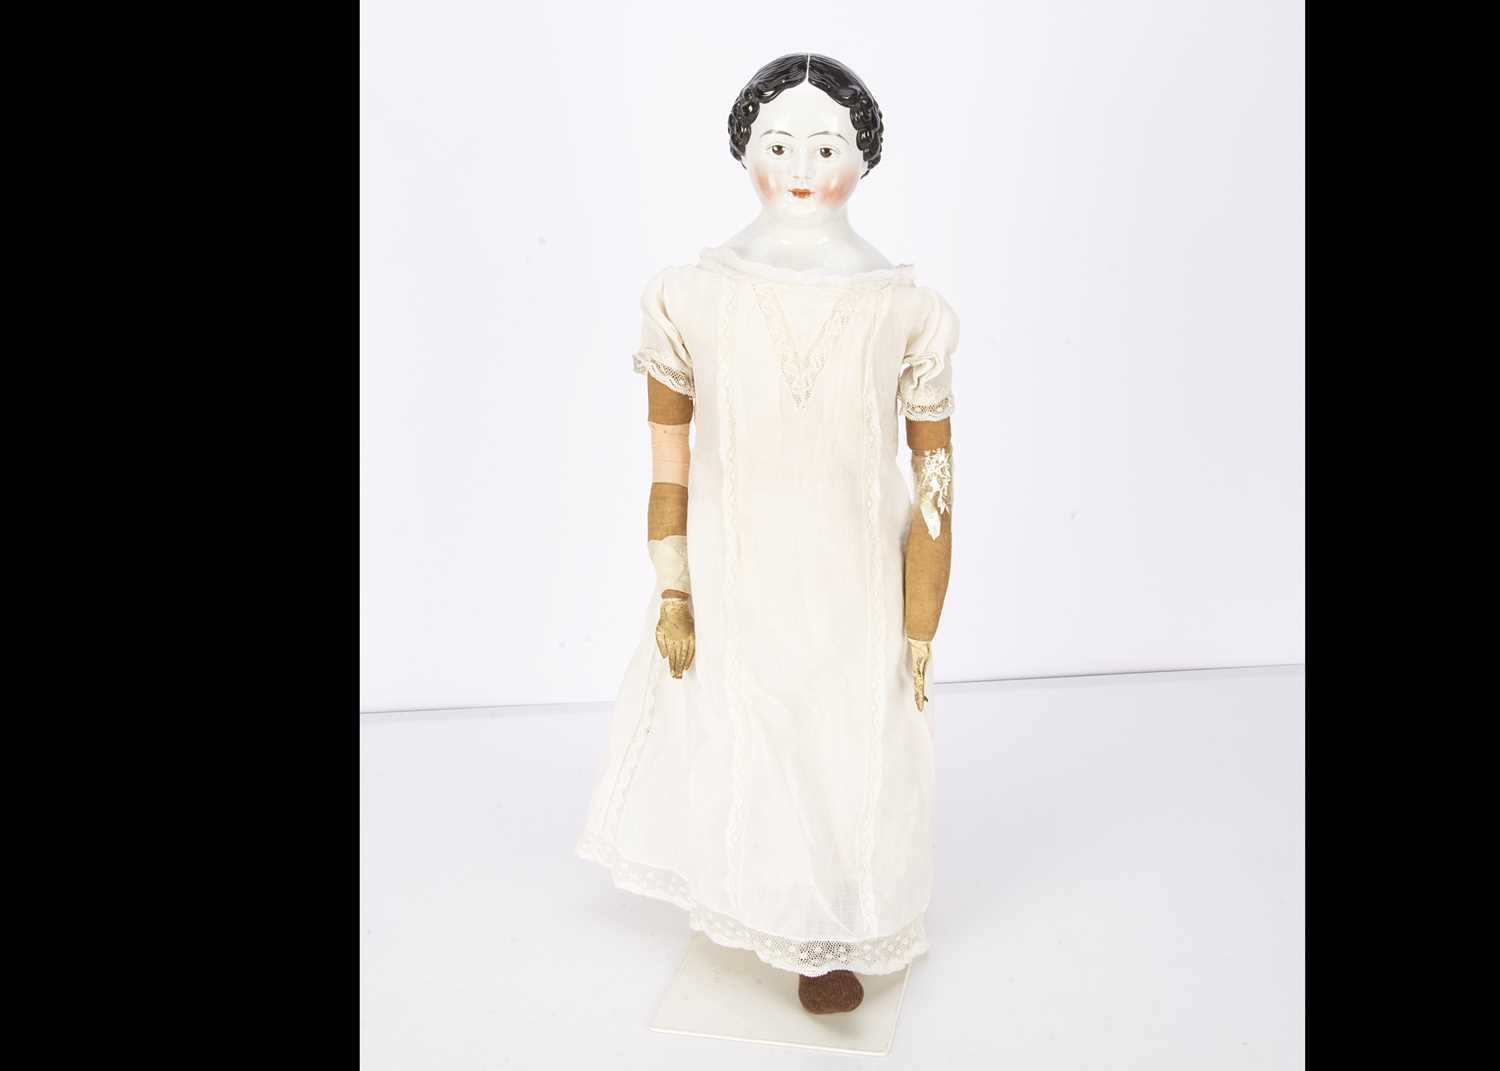 A rare Kloster Vielsdorf china shoulder-head Grenier-type child doll 1860s, - Image 2 of 2